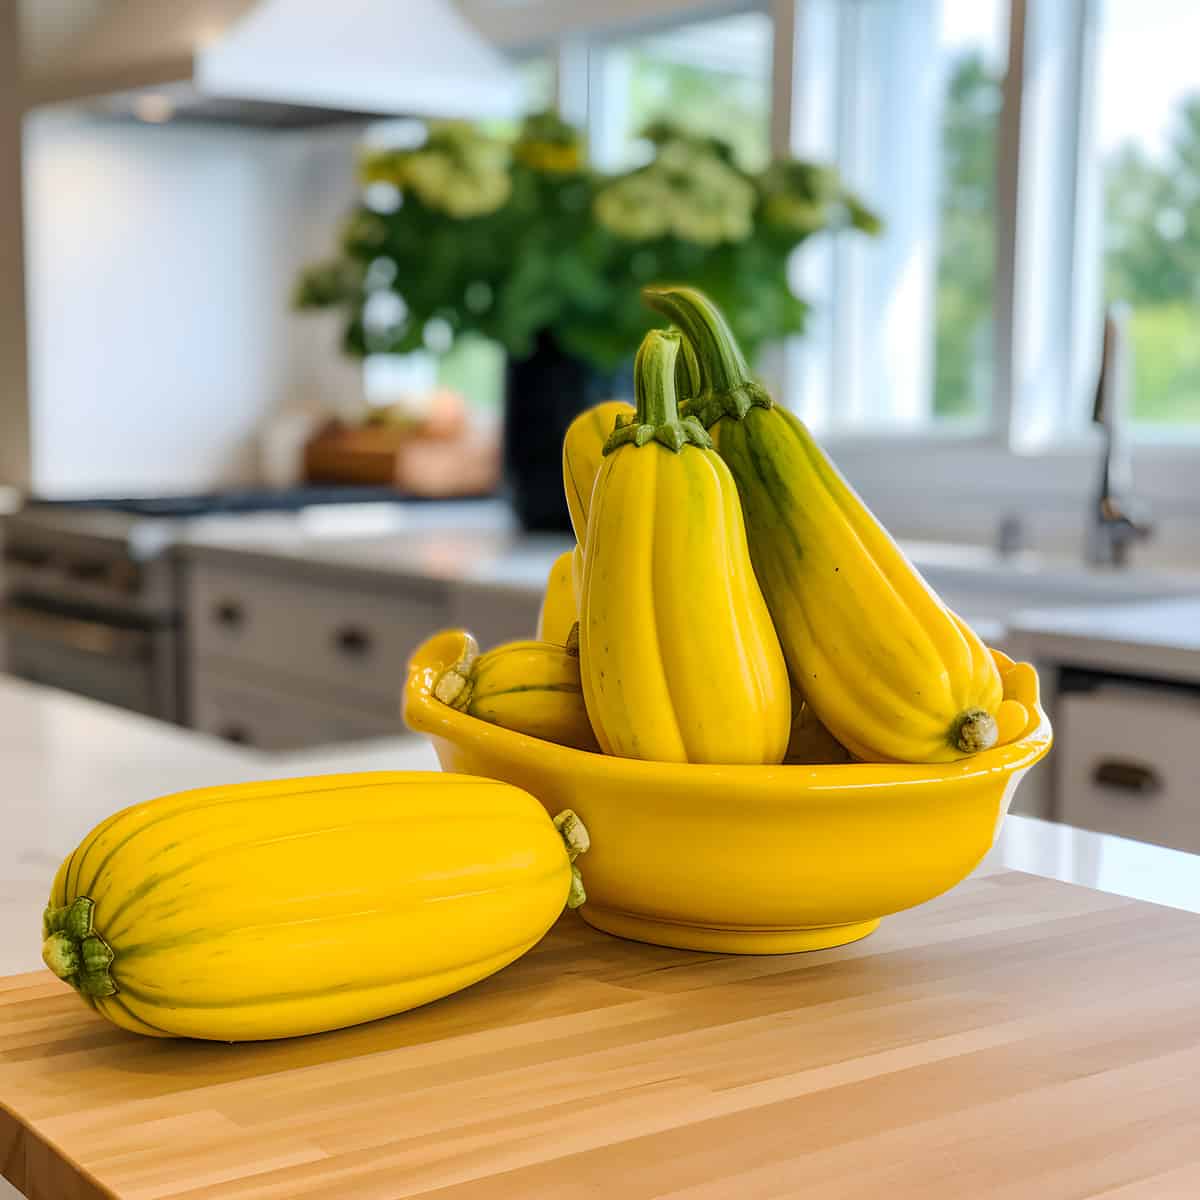 Yellow Summer Squash on a kitchen counter